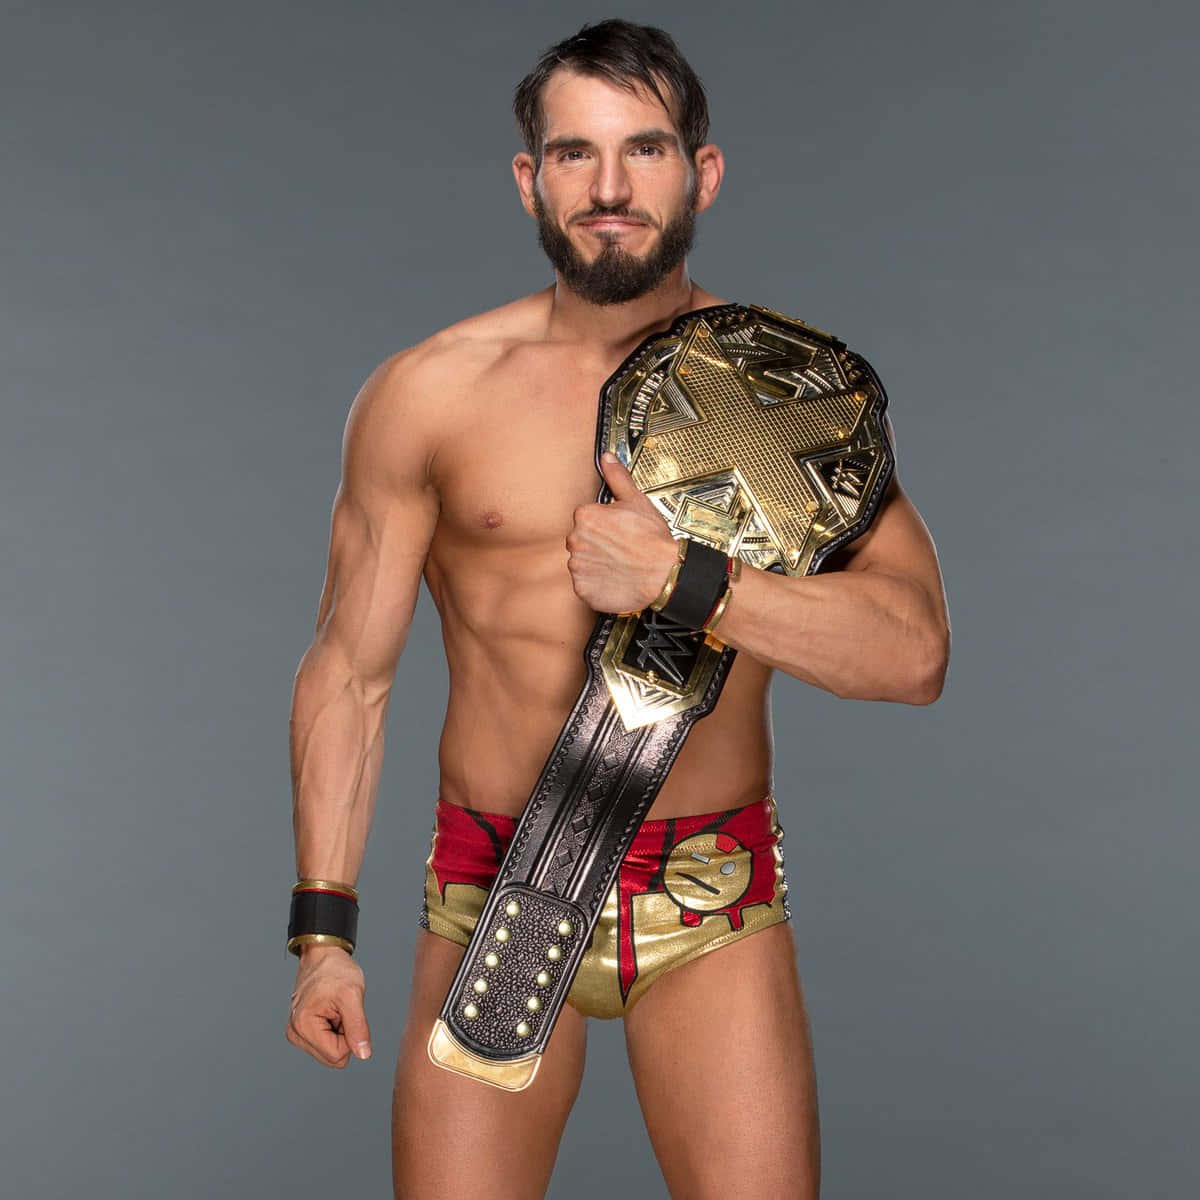 Nxt Champion Johnny Gargano Is Translated To Nxt Champion Johnny Gargano In German. Wallpaper